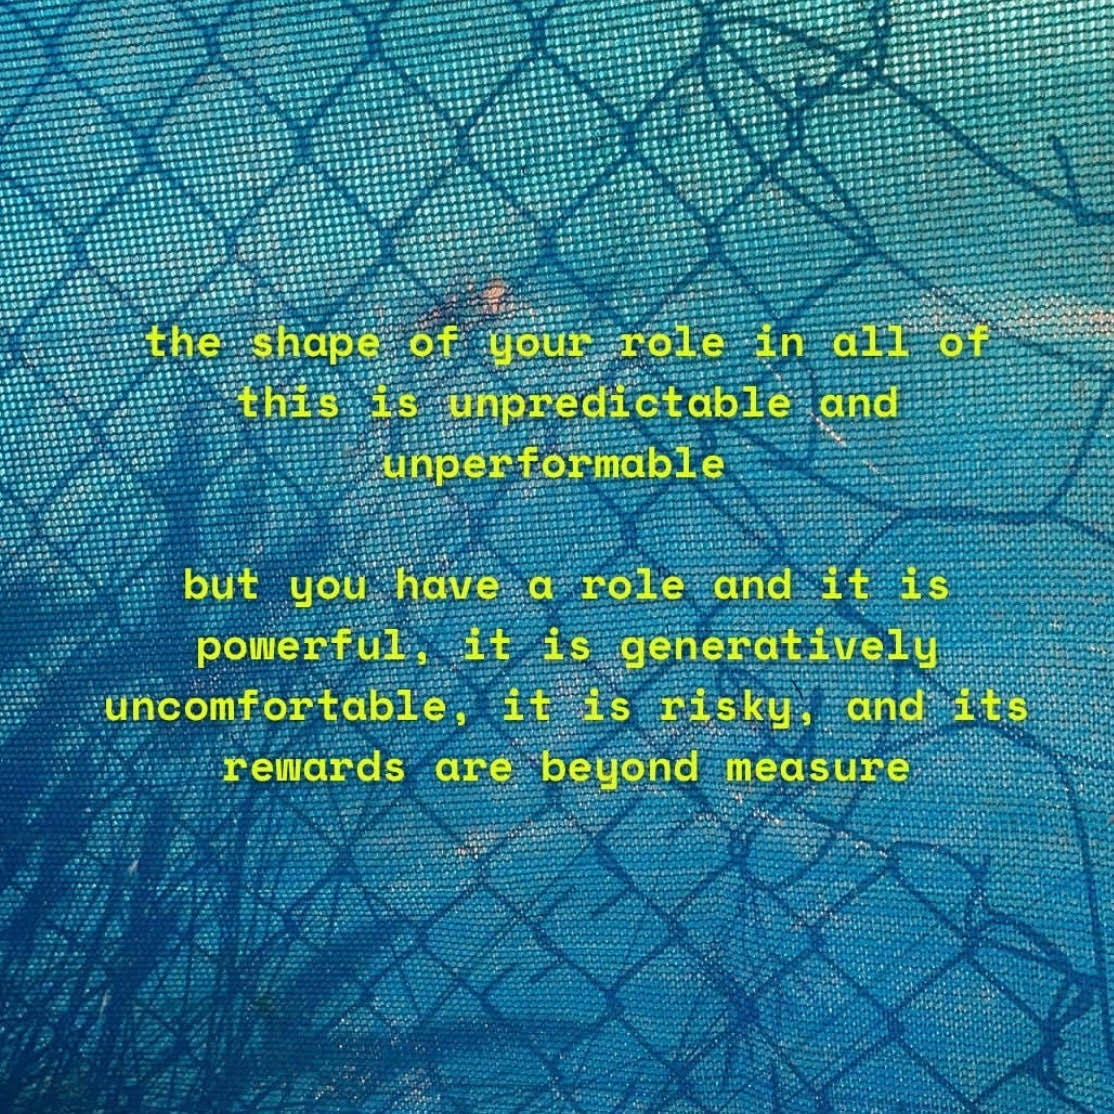 an imagine of a torn chain link fence with a blue filter on top. centered yellow text reads, "the shape of your role in all of this is unpredictable and unperformable. but you have a role and it is powerful, it is generatively uncomfortable, it is risky, and its rewards are beyond measure"